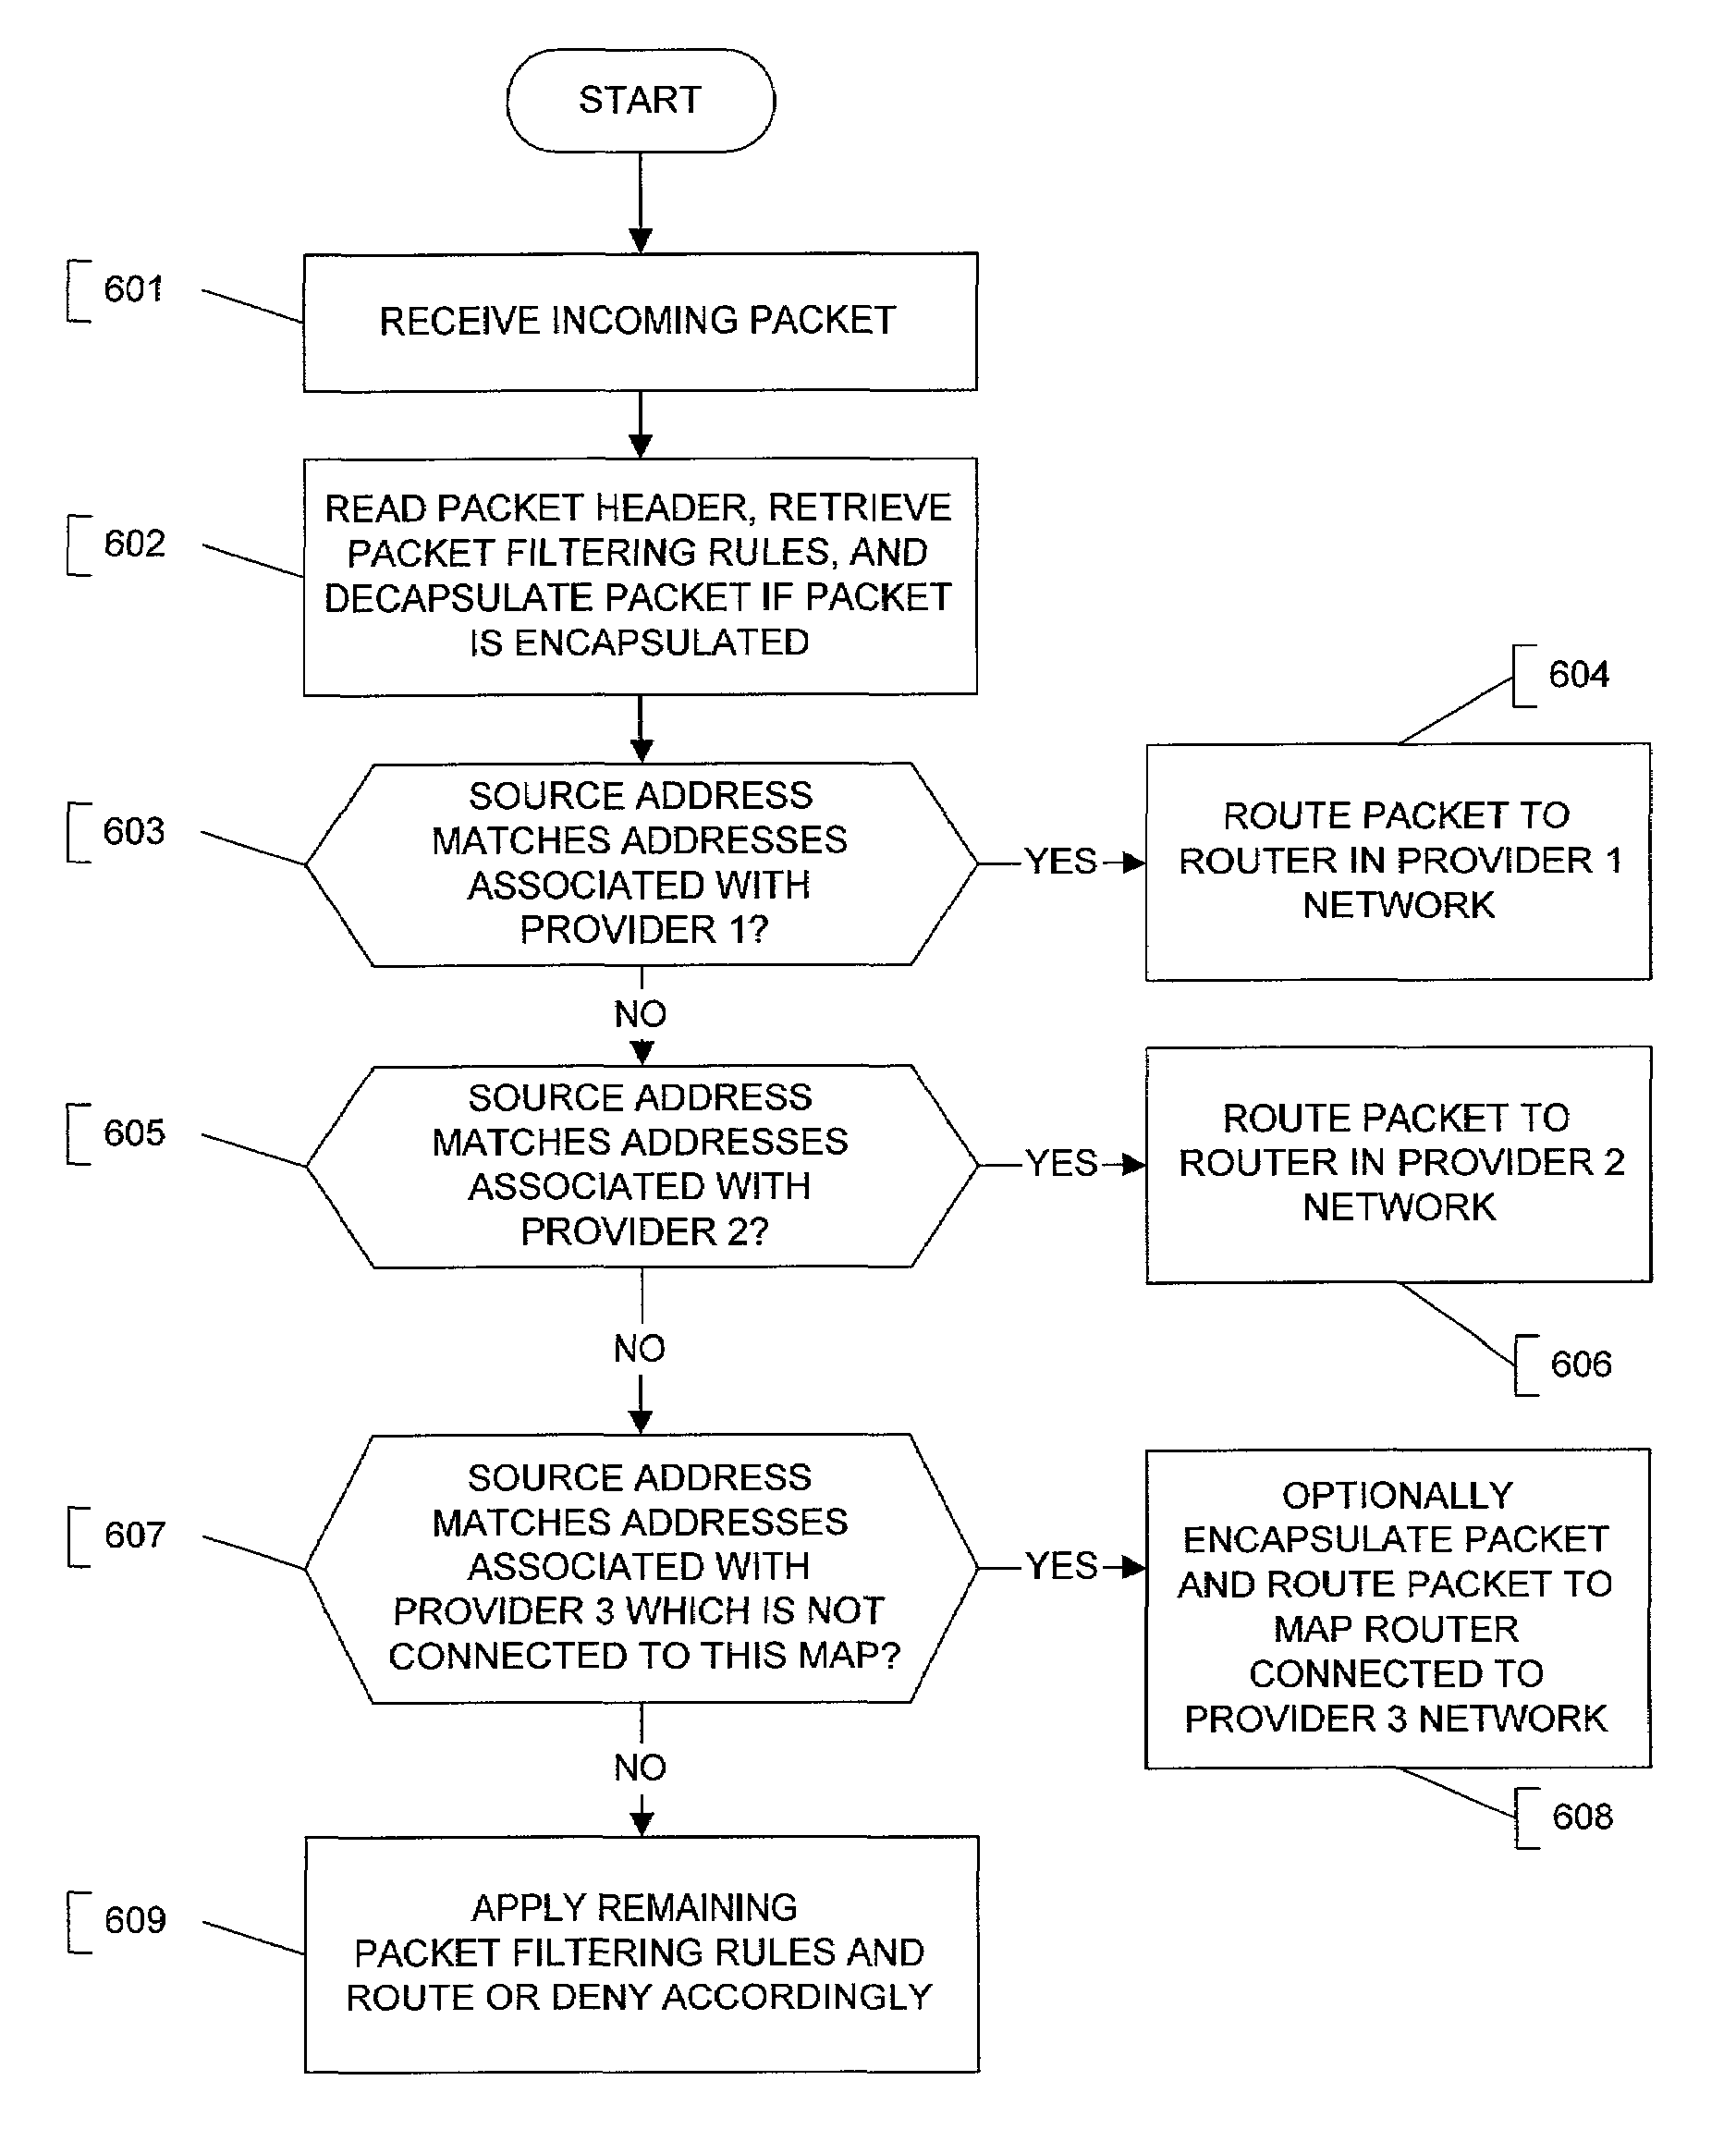 Service selection in a shared access network using policy routing